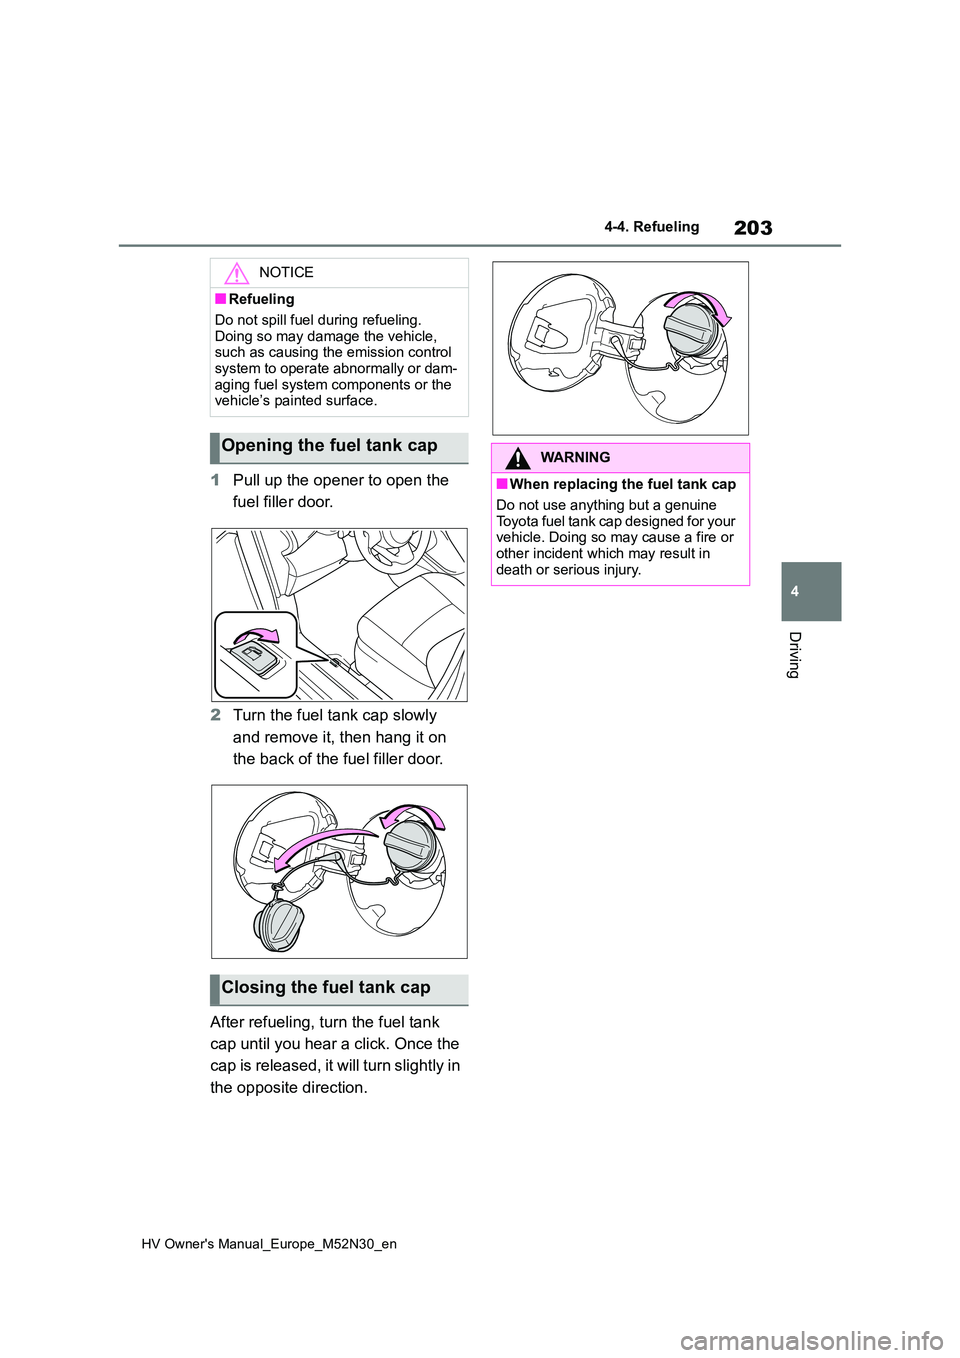 TOYOTA YARIS 2022  Owners Manual 203
4
HV Owner's Manual_Europe_M52N30_en
4-4. Refueling
Driving
1Pull up the opener to open the  
fuel filler door. 
2 Turn the fuel tank cap slowly  
and remove it, then hang it on  
the back of 